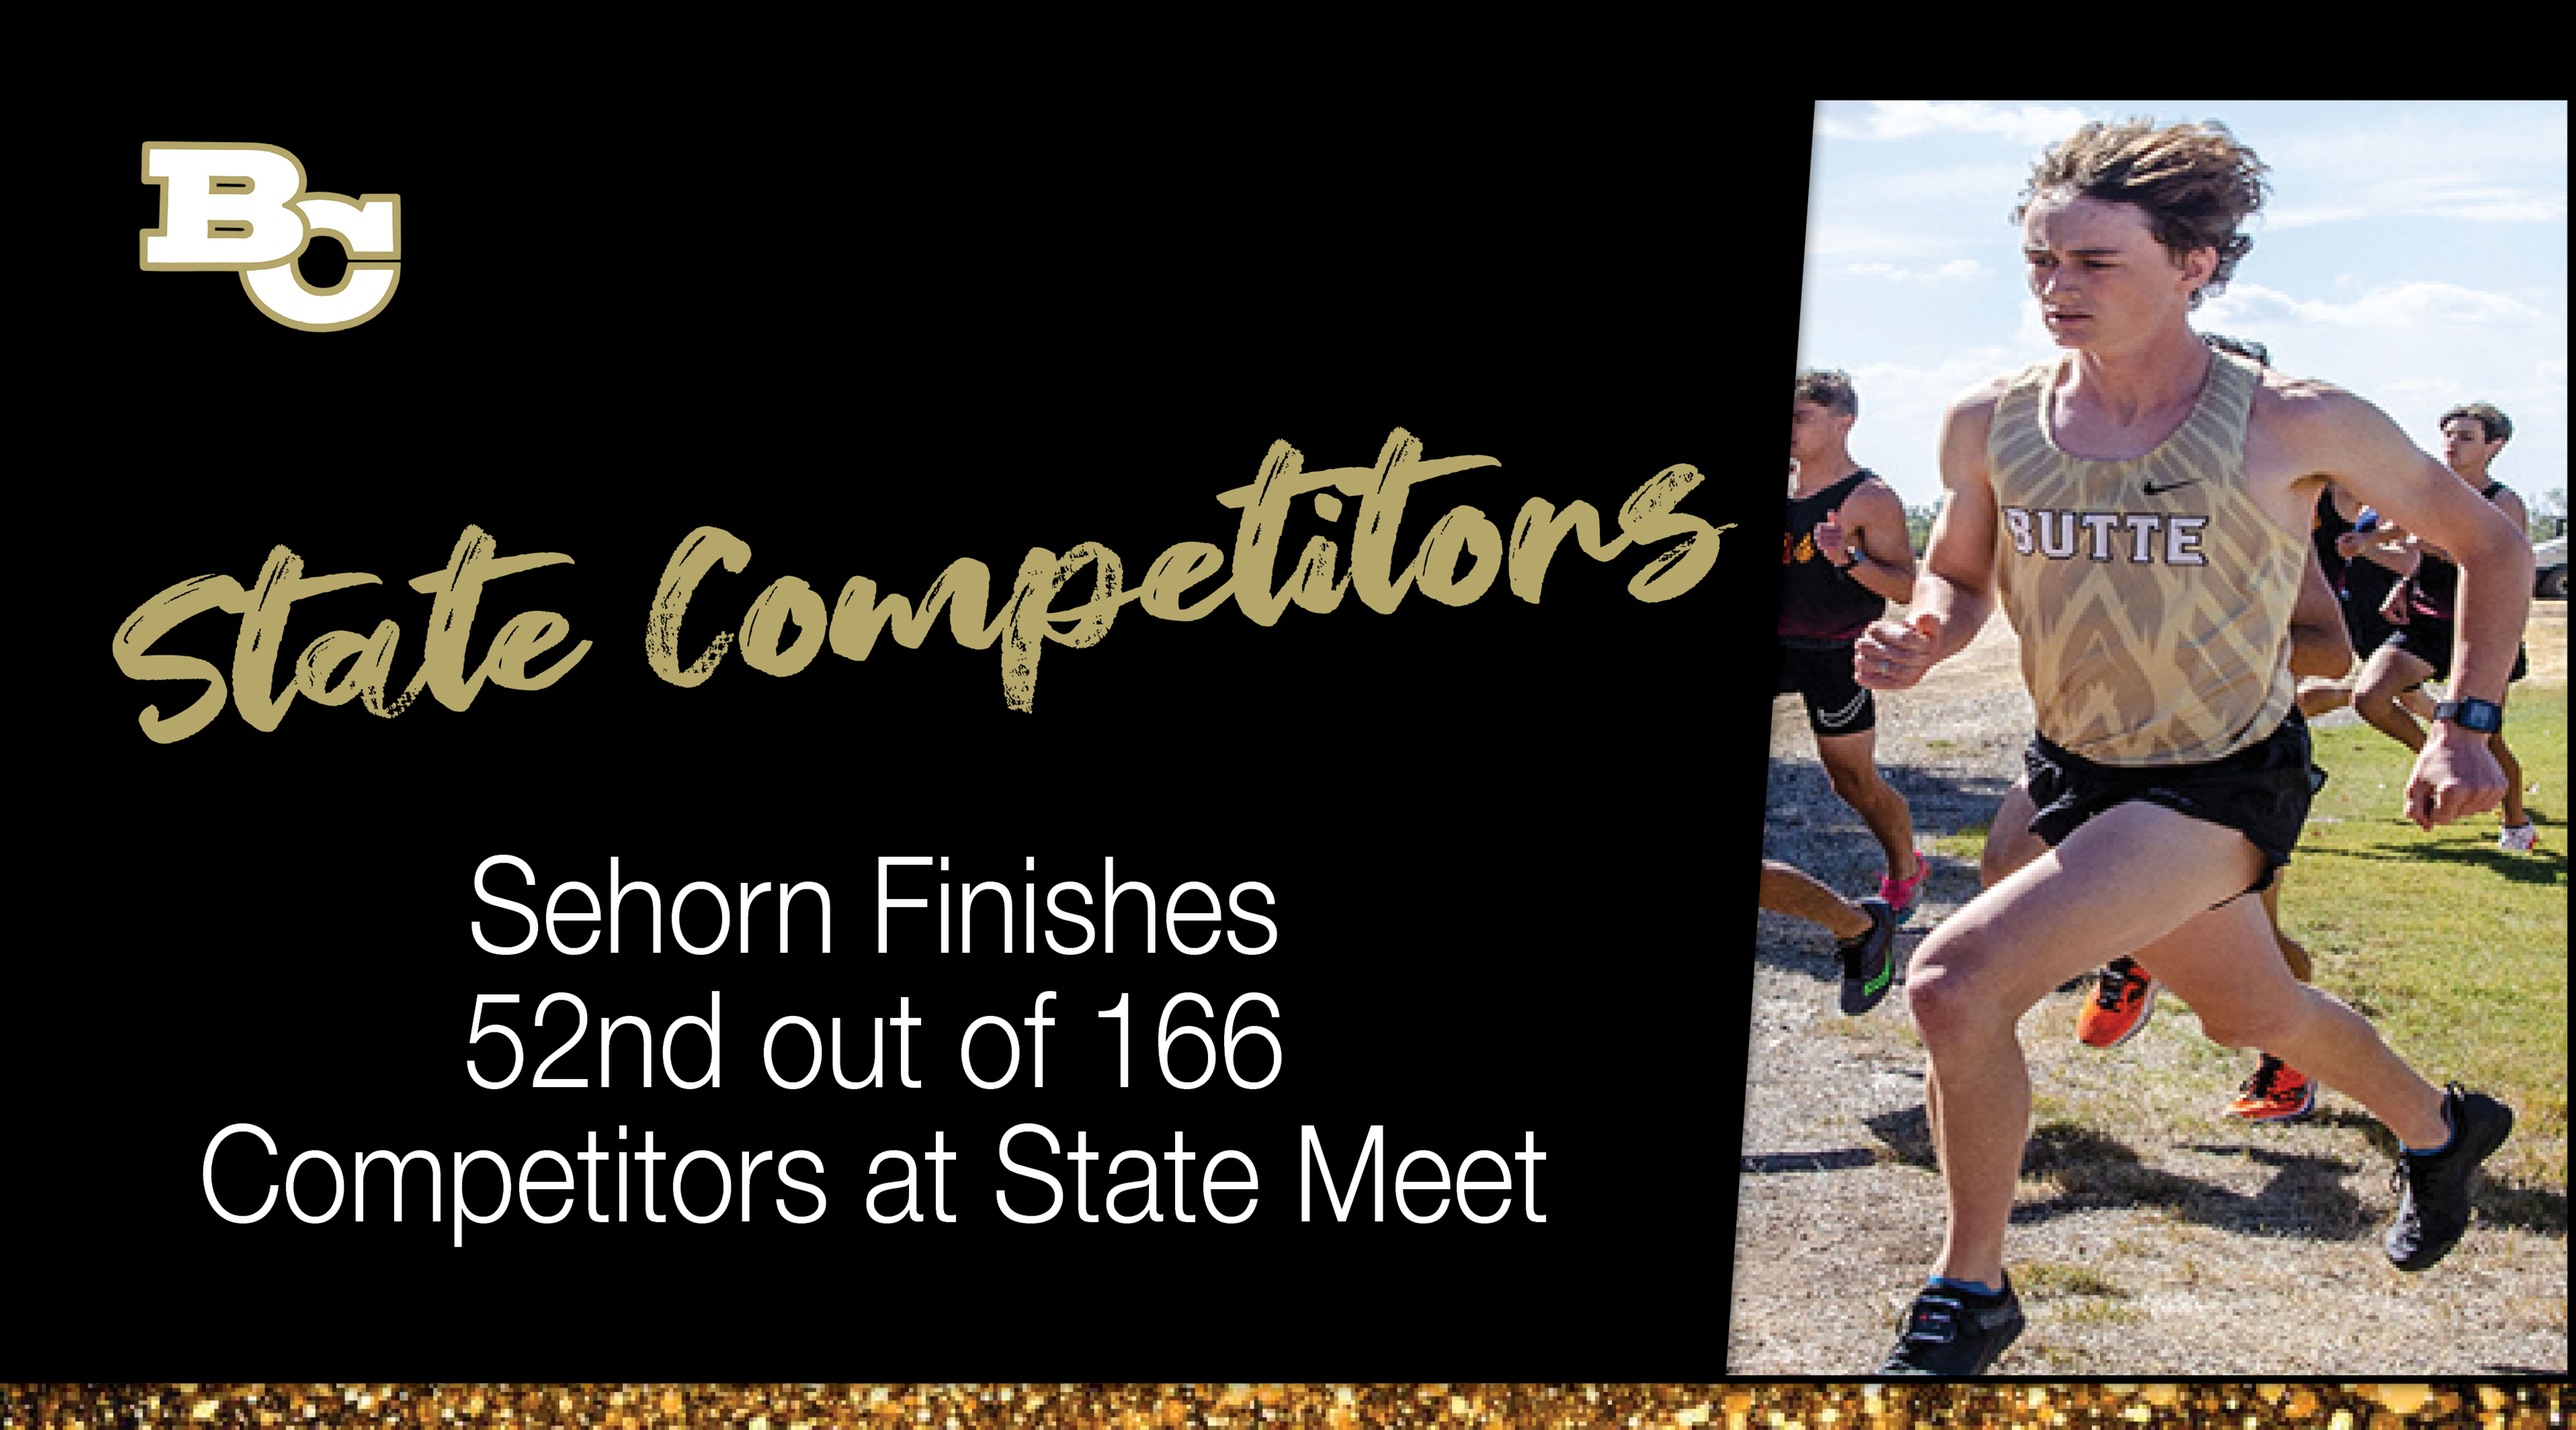 Sehorn Finishes 52nd to Lead Roadrunners at State Meet